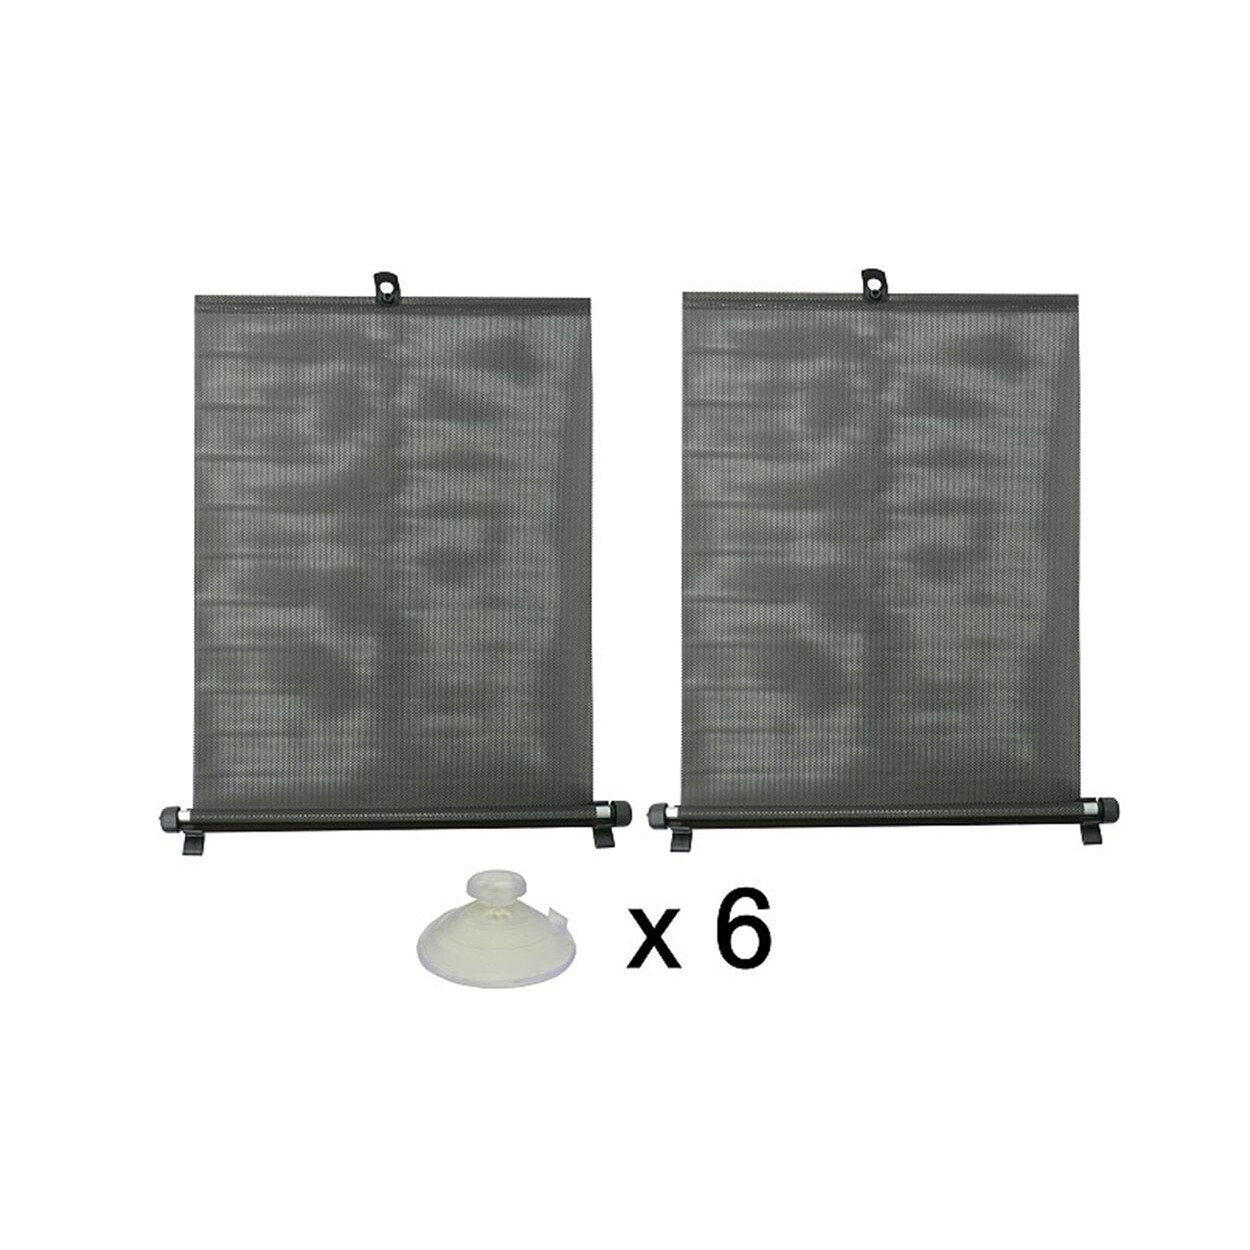 Amio roller sunshade with suction cups 2pcs, 45cm, Black thumb